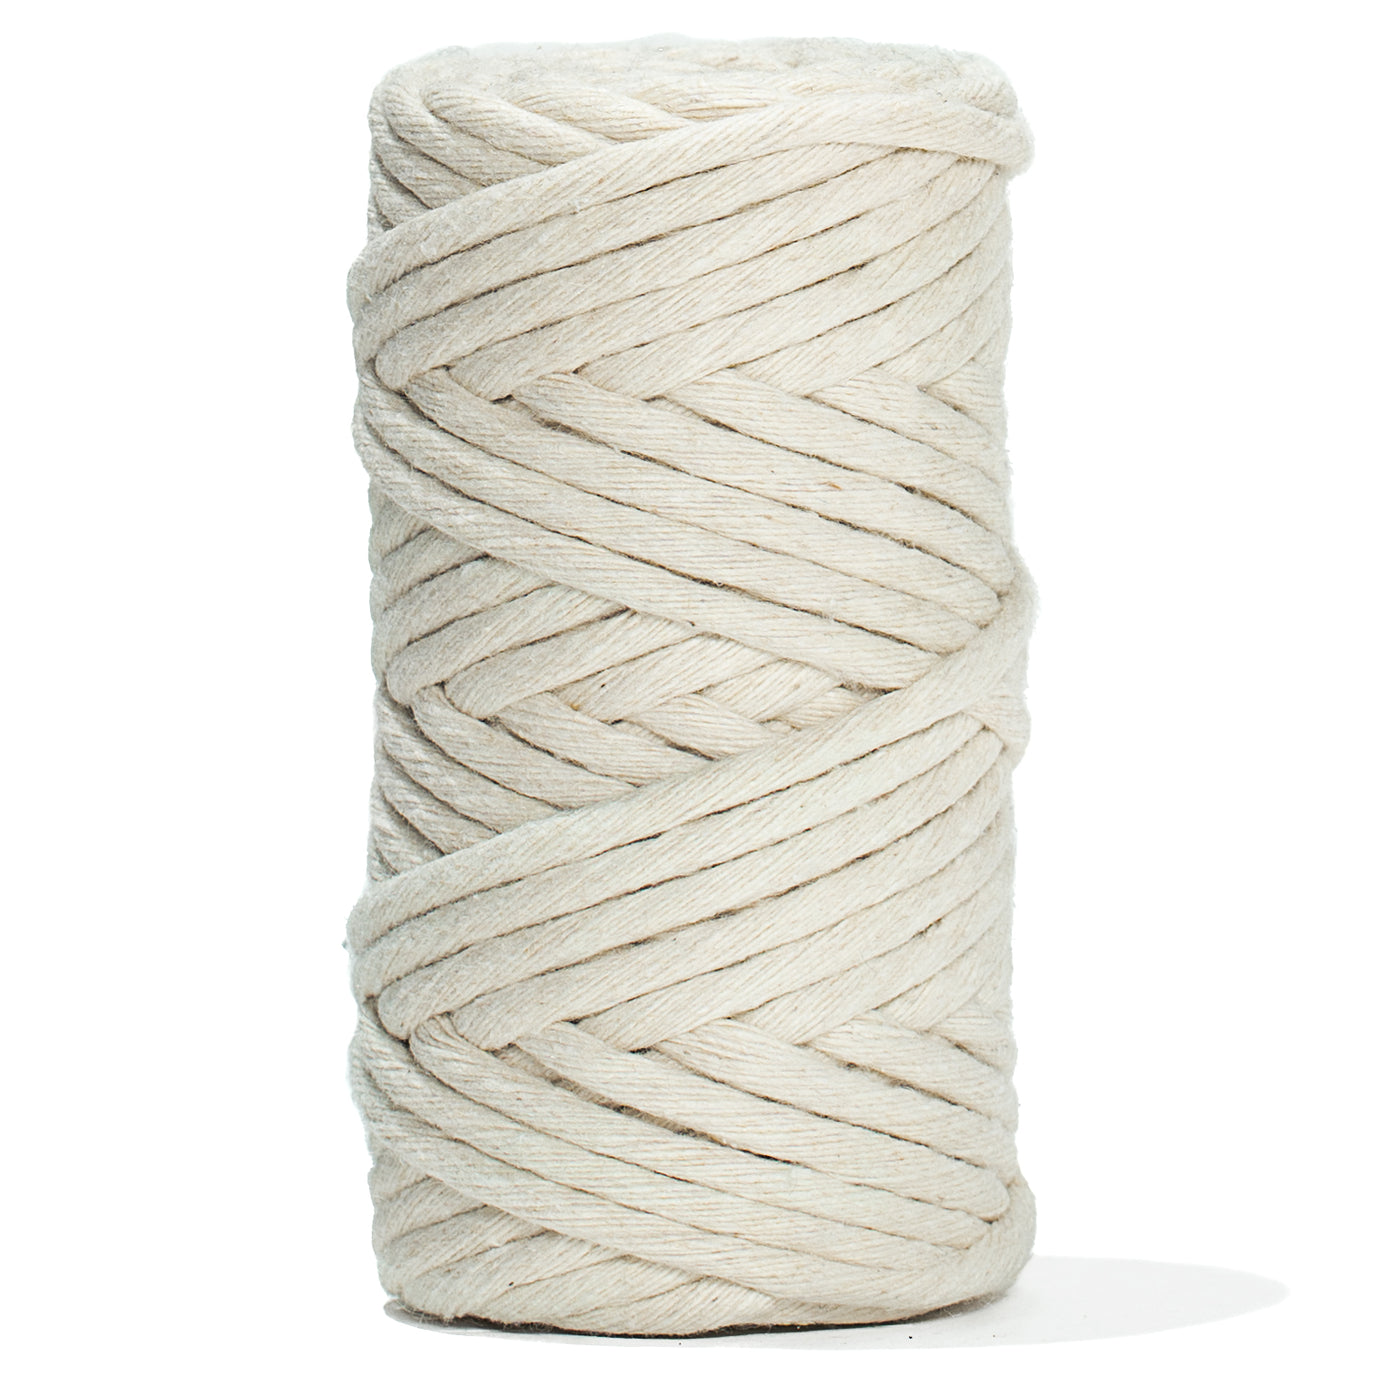 MACRAME SOFT COTTON CORD RECYCLED 4 MM - 1 SINGLE STRAND - IVORY COLOR  GANXXET